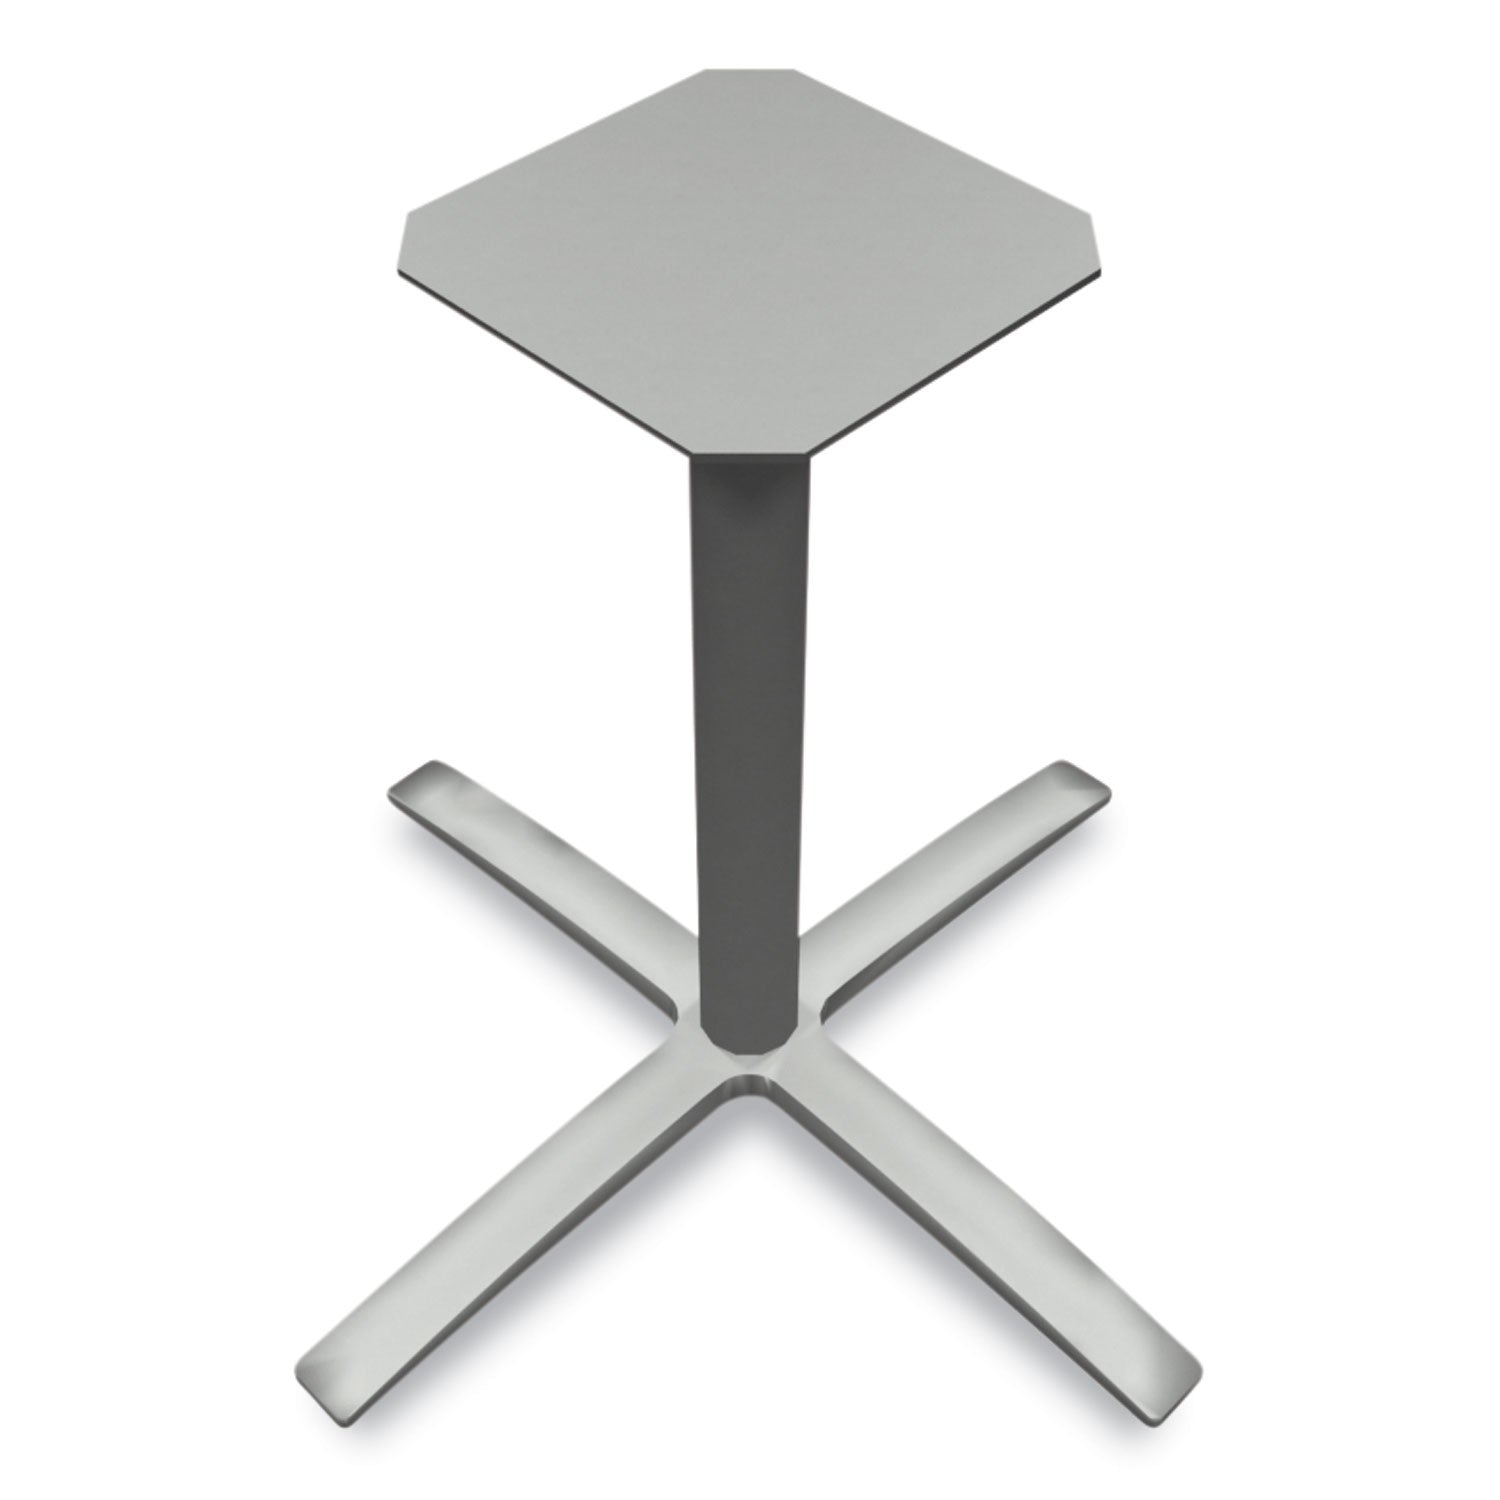 between-seated-height-x-base-for-42-table-tops-3268w-x-2957h-silver_honbtx30lpr8 - 3